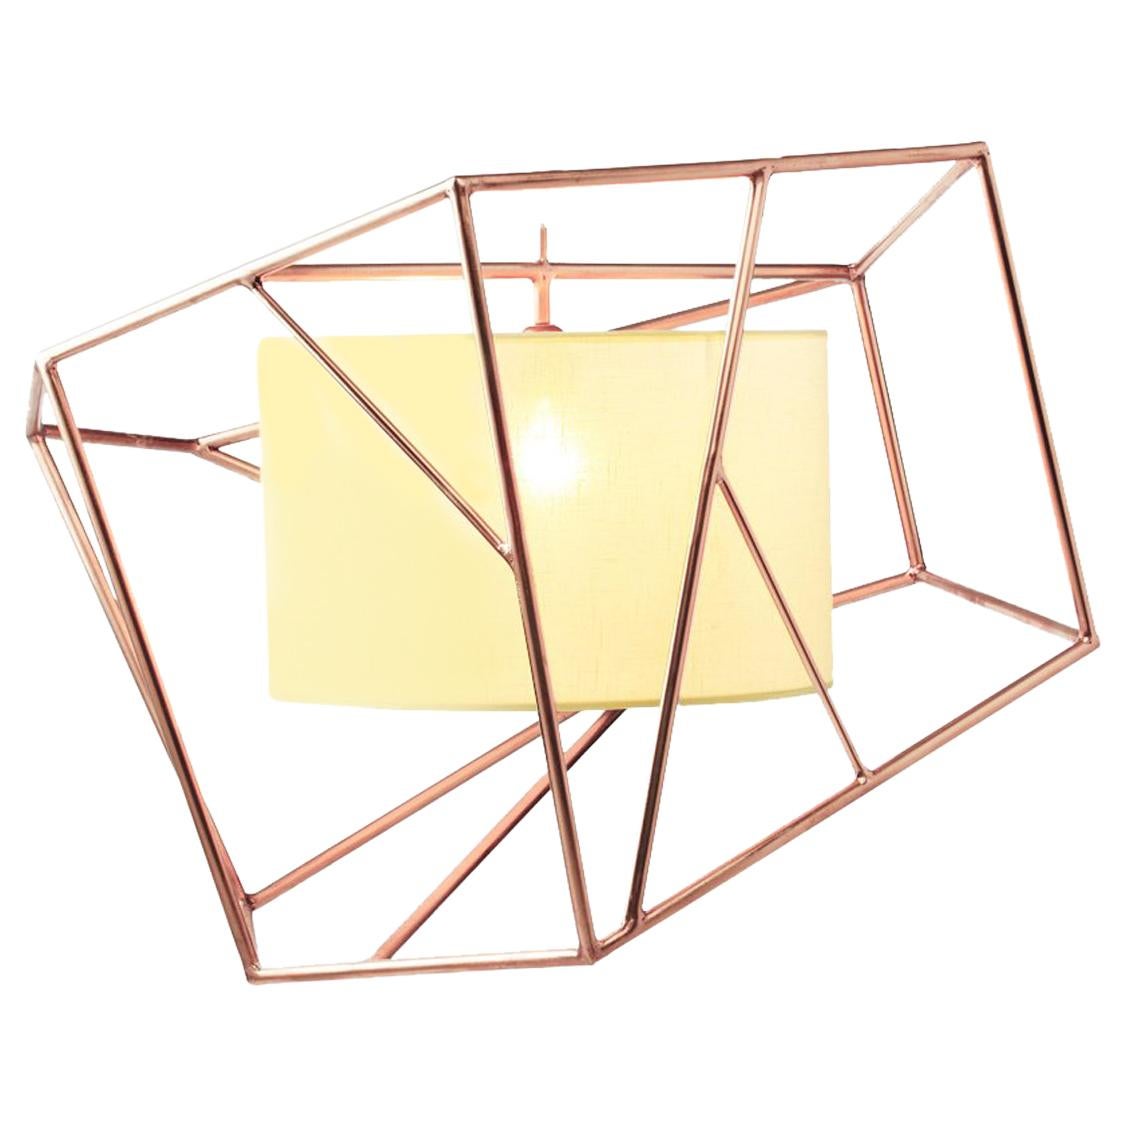 Contemporary Art Deco Inspired Star Pendant Lamp Polished Copper Linen Shade